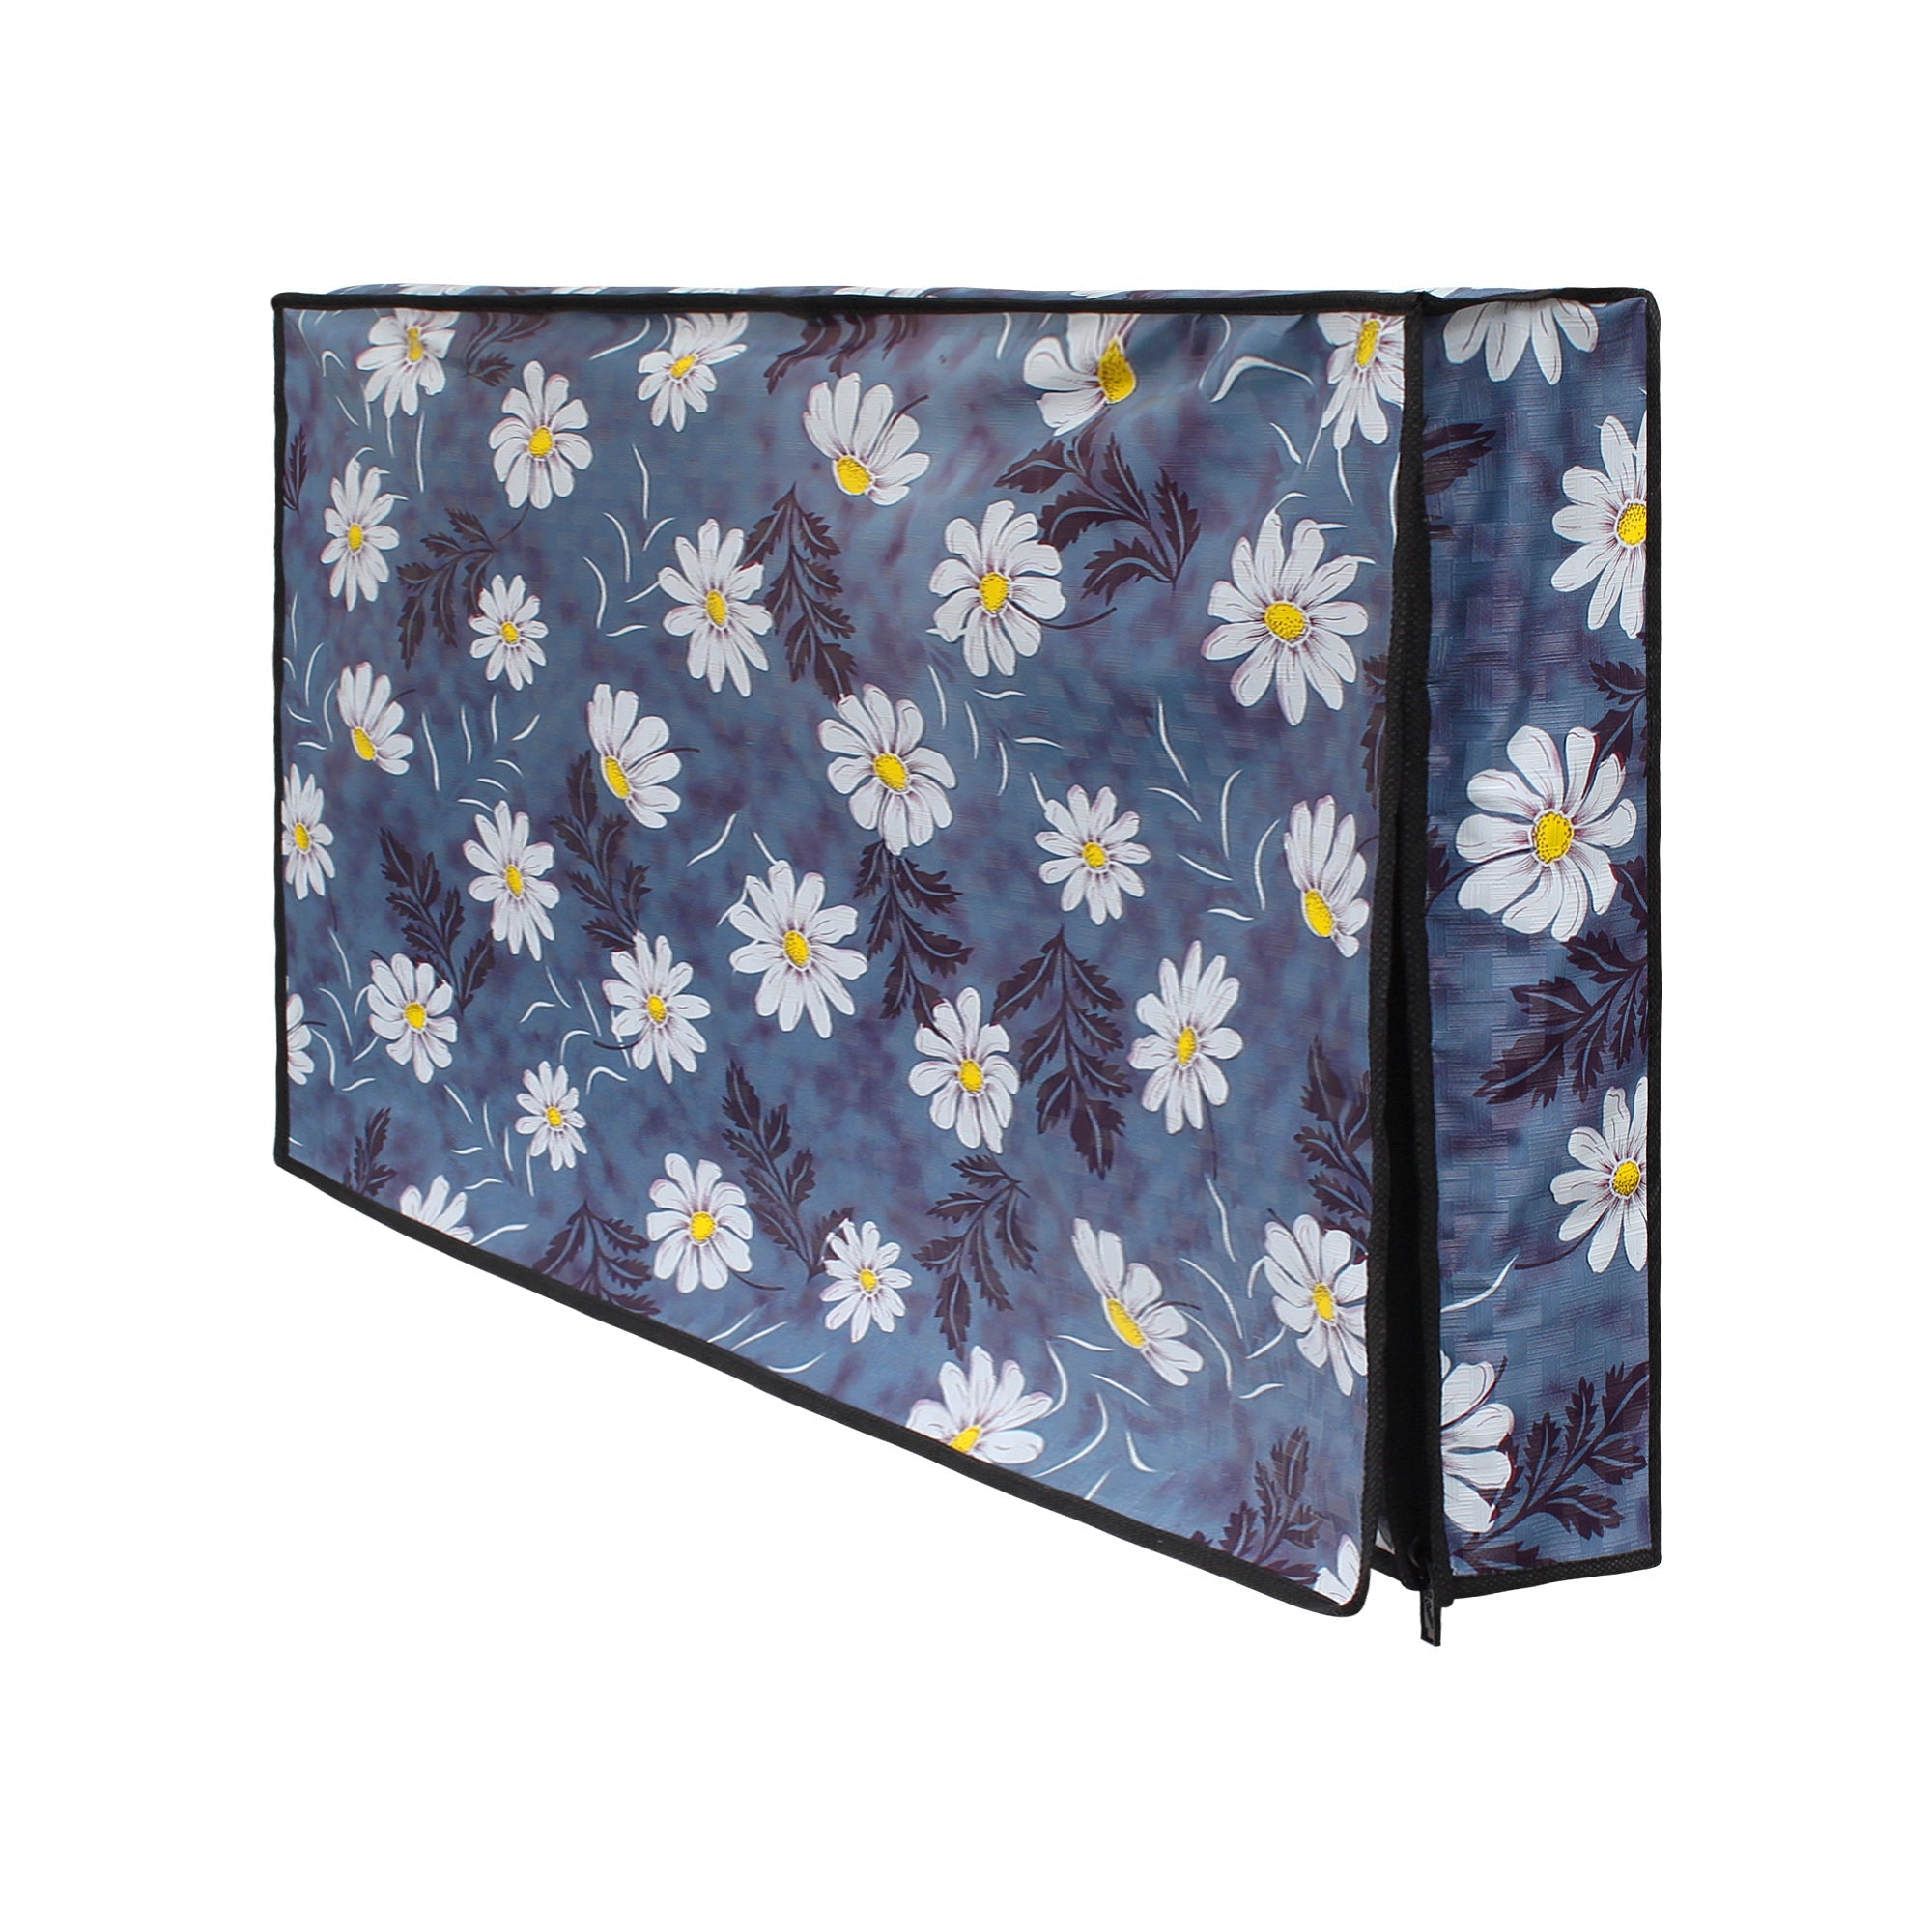 Waterproof Dustproof PVC LED TV Cover, SA10 - Dream Care Furnishings Private Limited